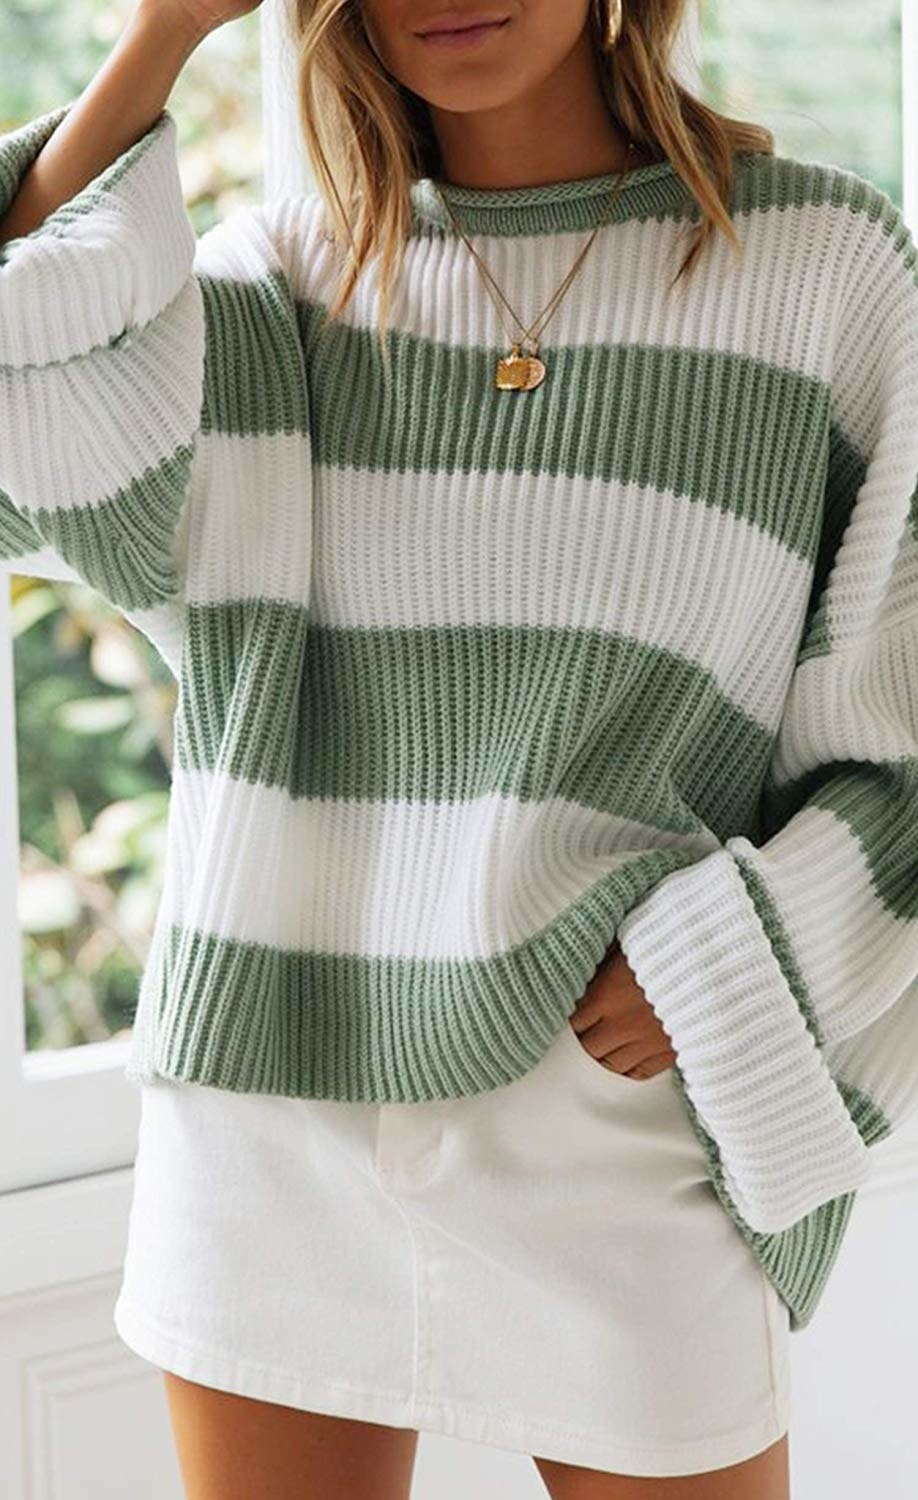 oversized striped sweater with green and white stripes